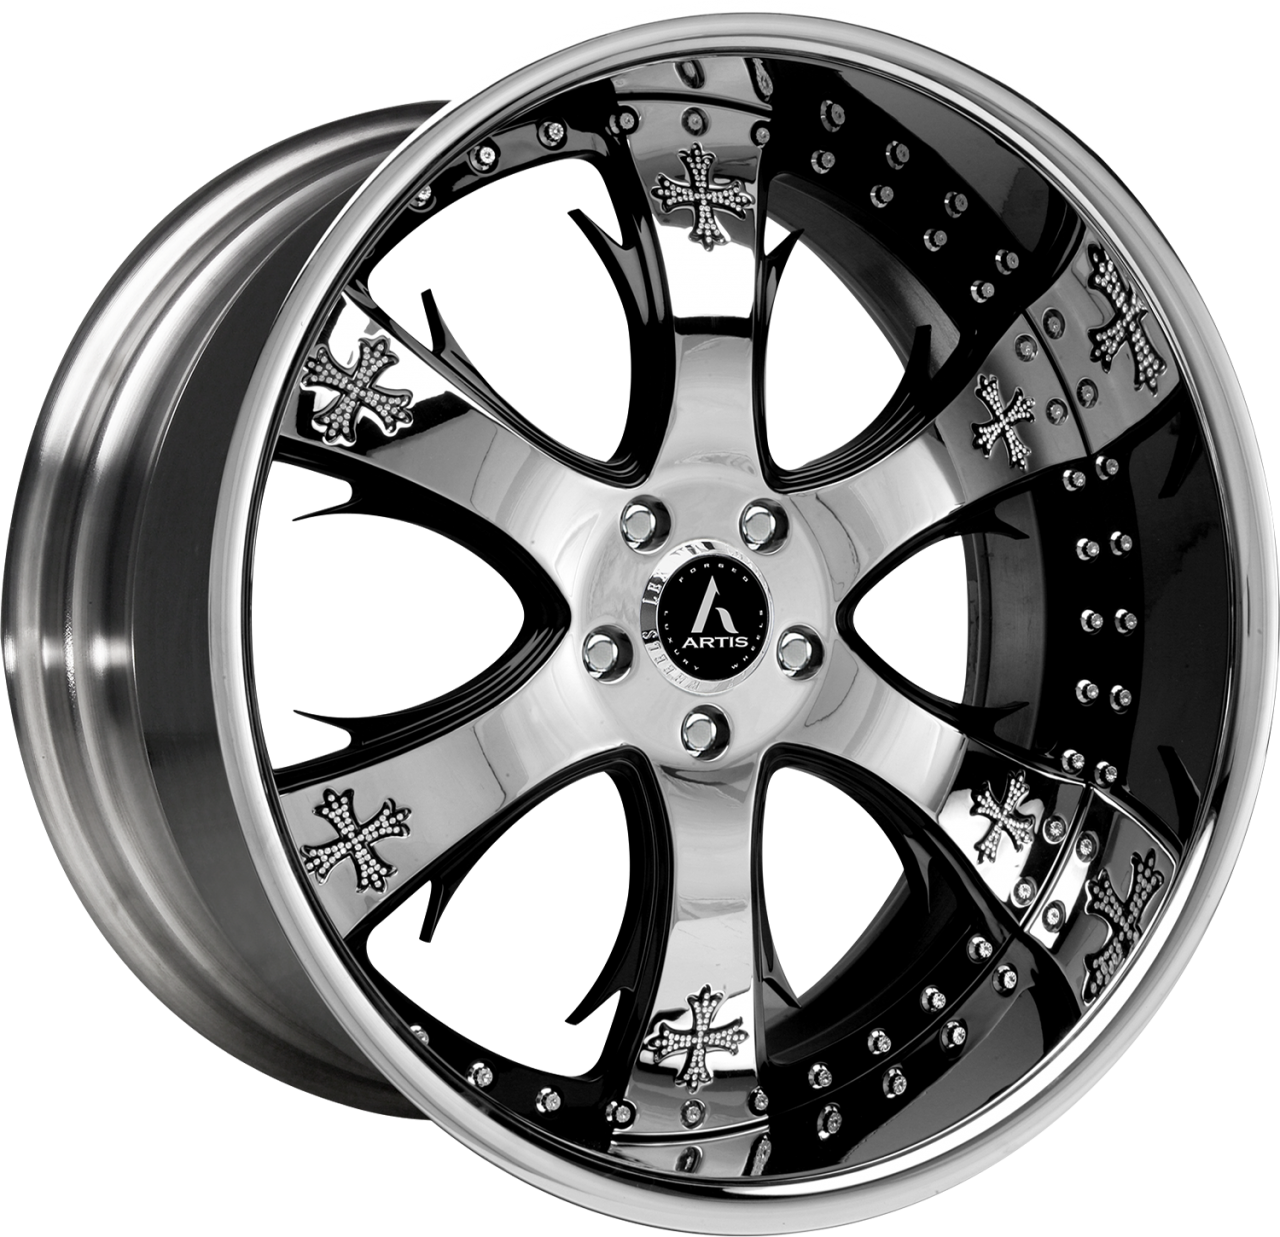 Artis Forged Cruces wheel with Chrome and Black finish